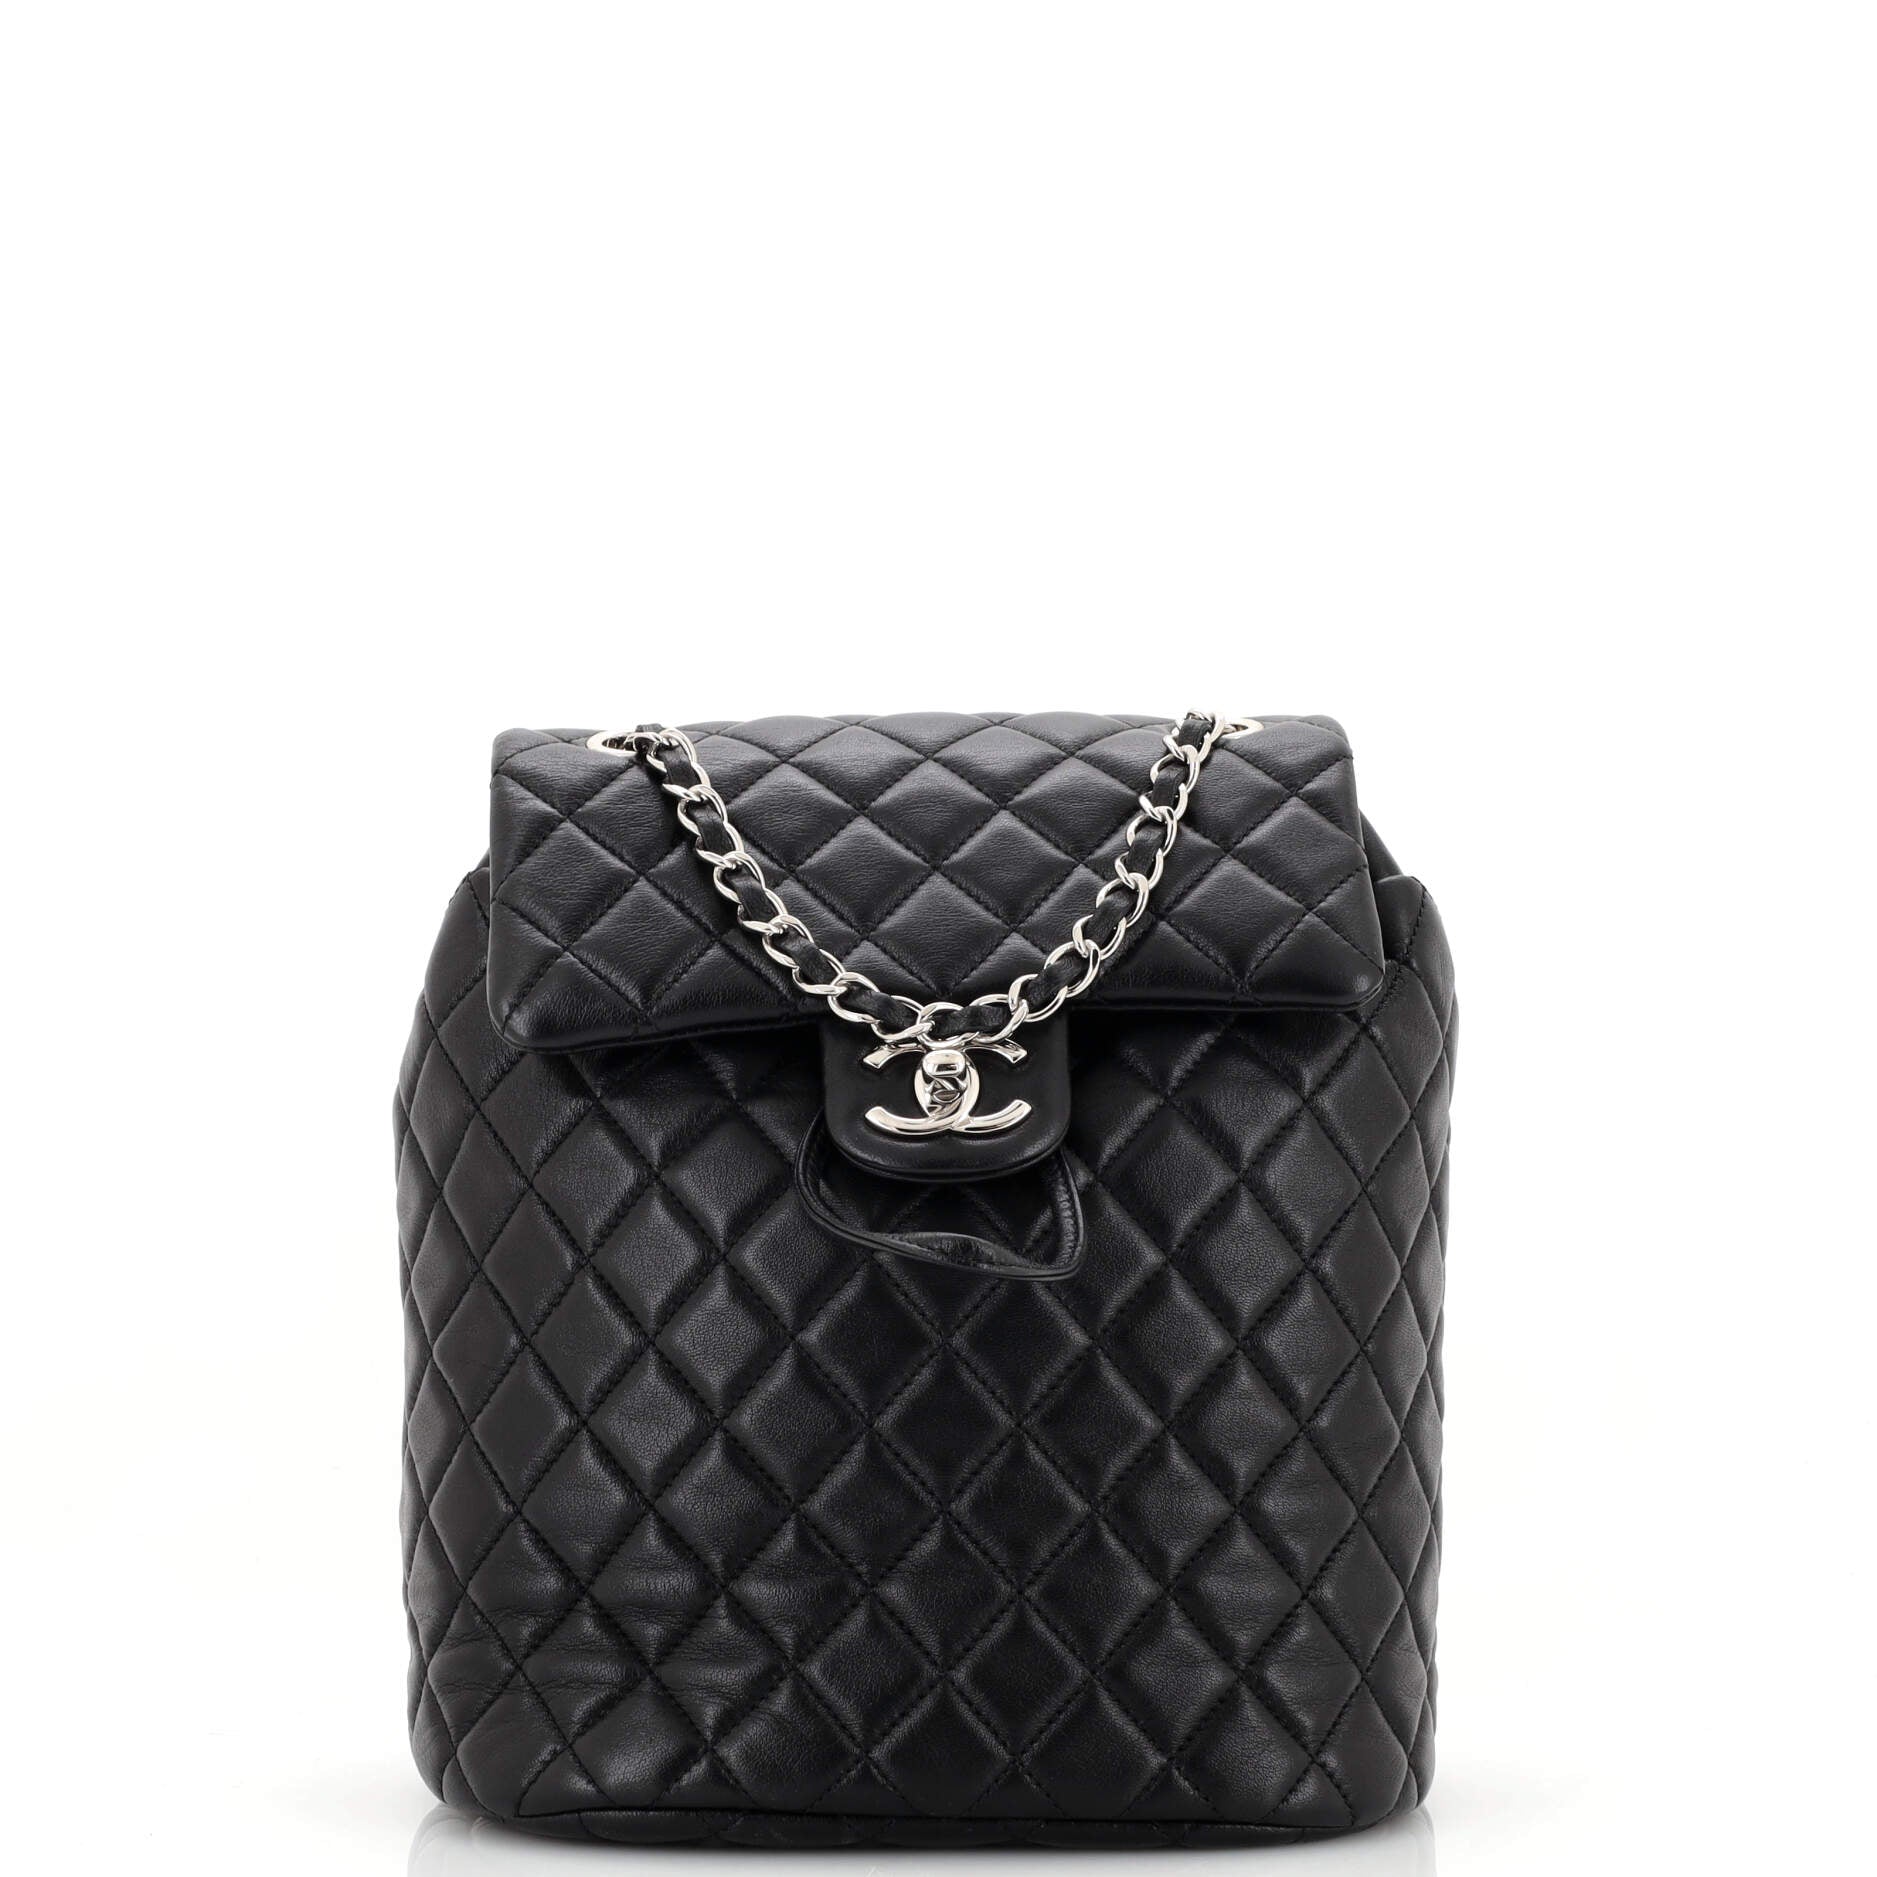 Authentic Chanel Backpack Small Paris-Salzburg Mountain Creme